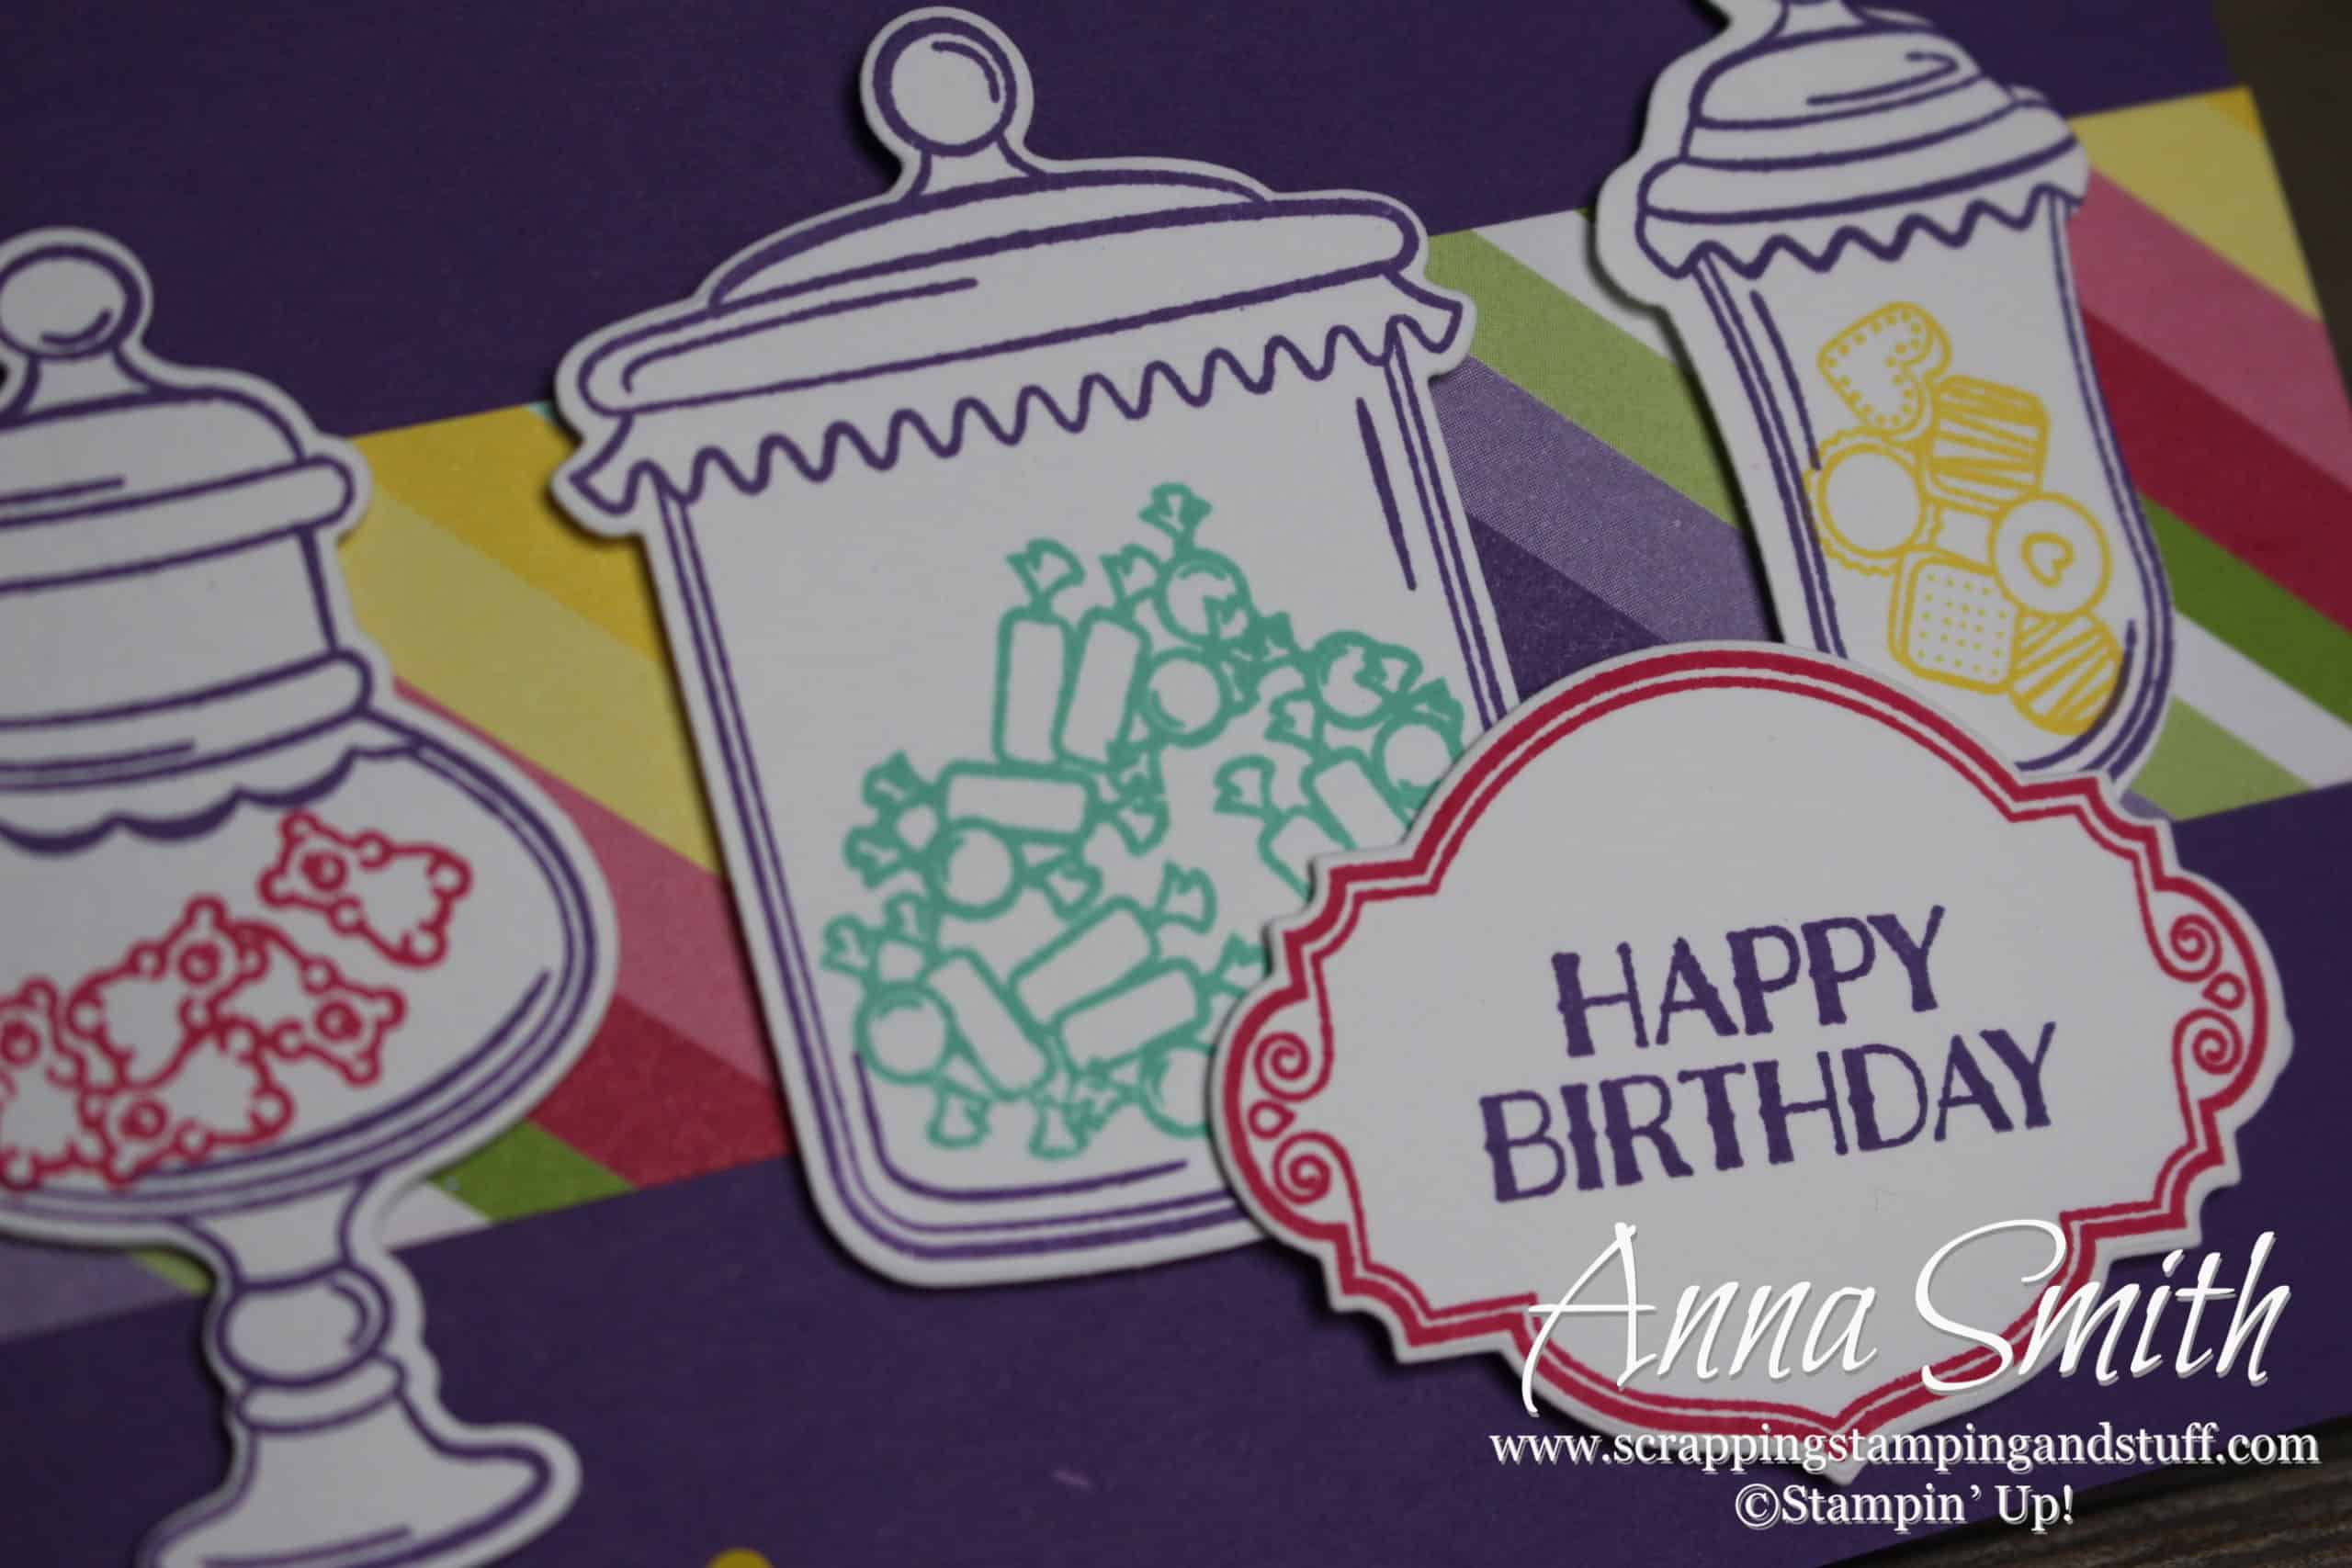 12 Days of Sneak Peeks – Birthday Card with Stampin’ Up! Sweetest Thing